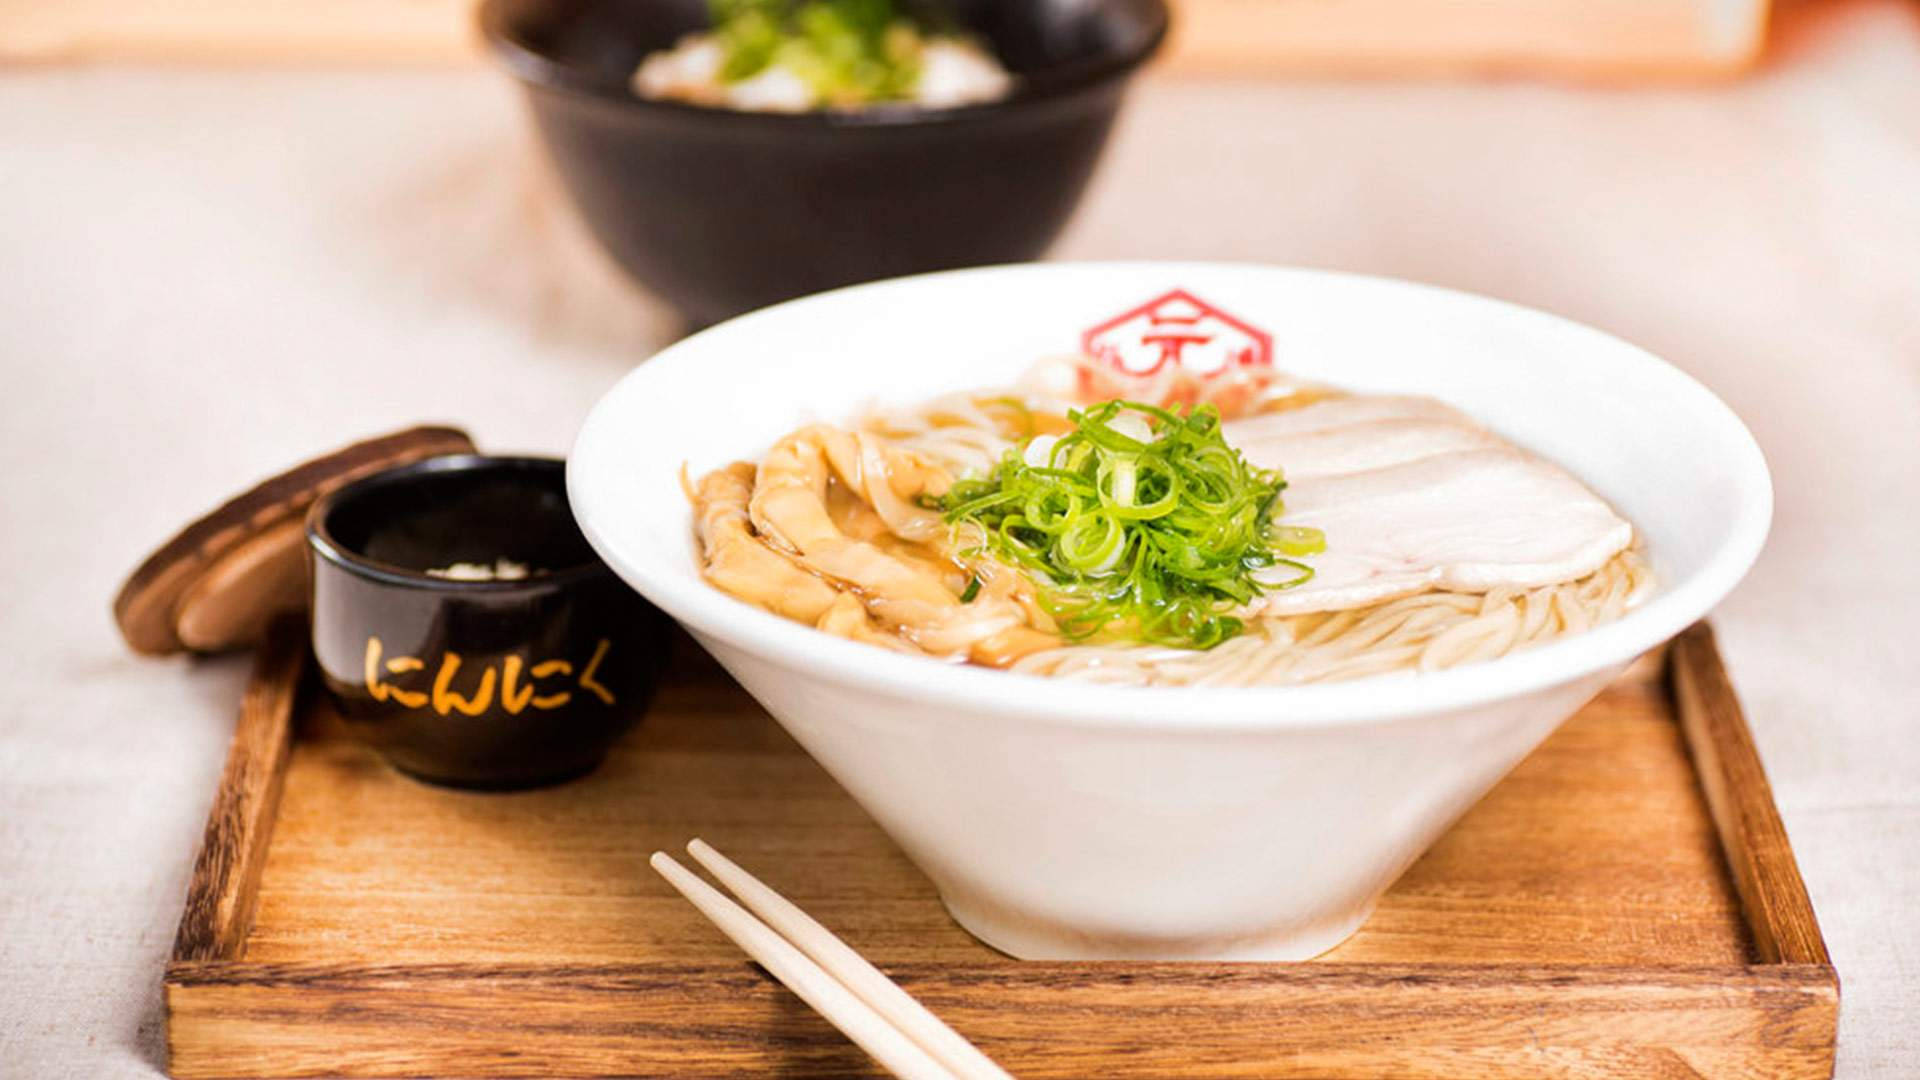 Delectable Hakata Ramen served in a White Dining Ware Wallpaper